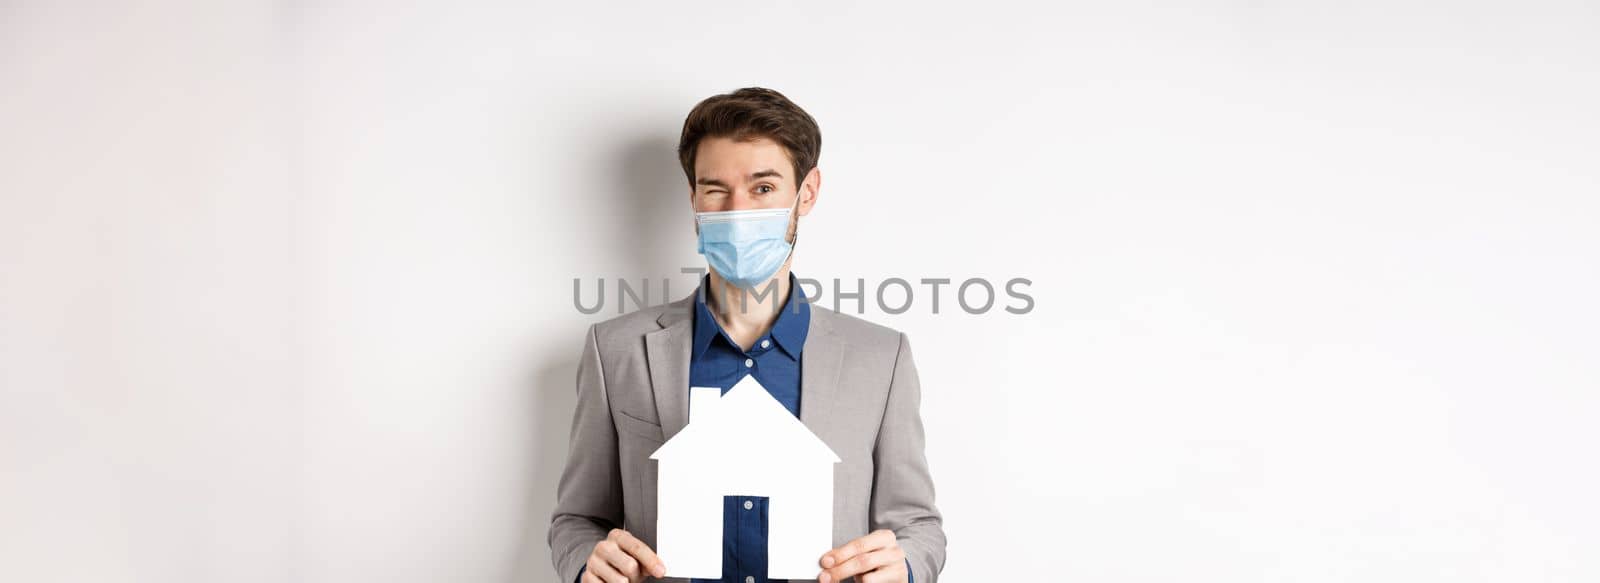 Real estate and covid-19 concept. Cheerful young man in medical mask and suit winking at camera, advertising new flats, showing paper house cutout.